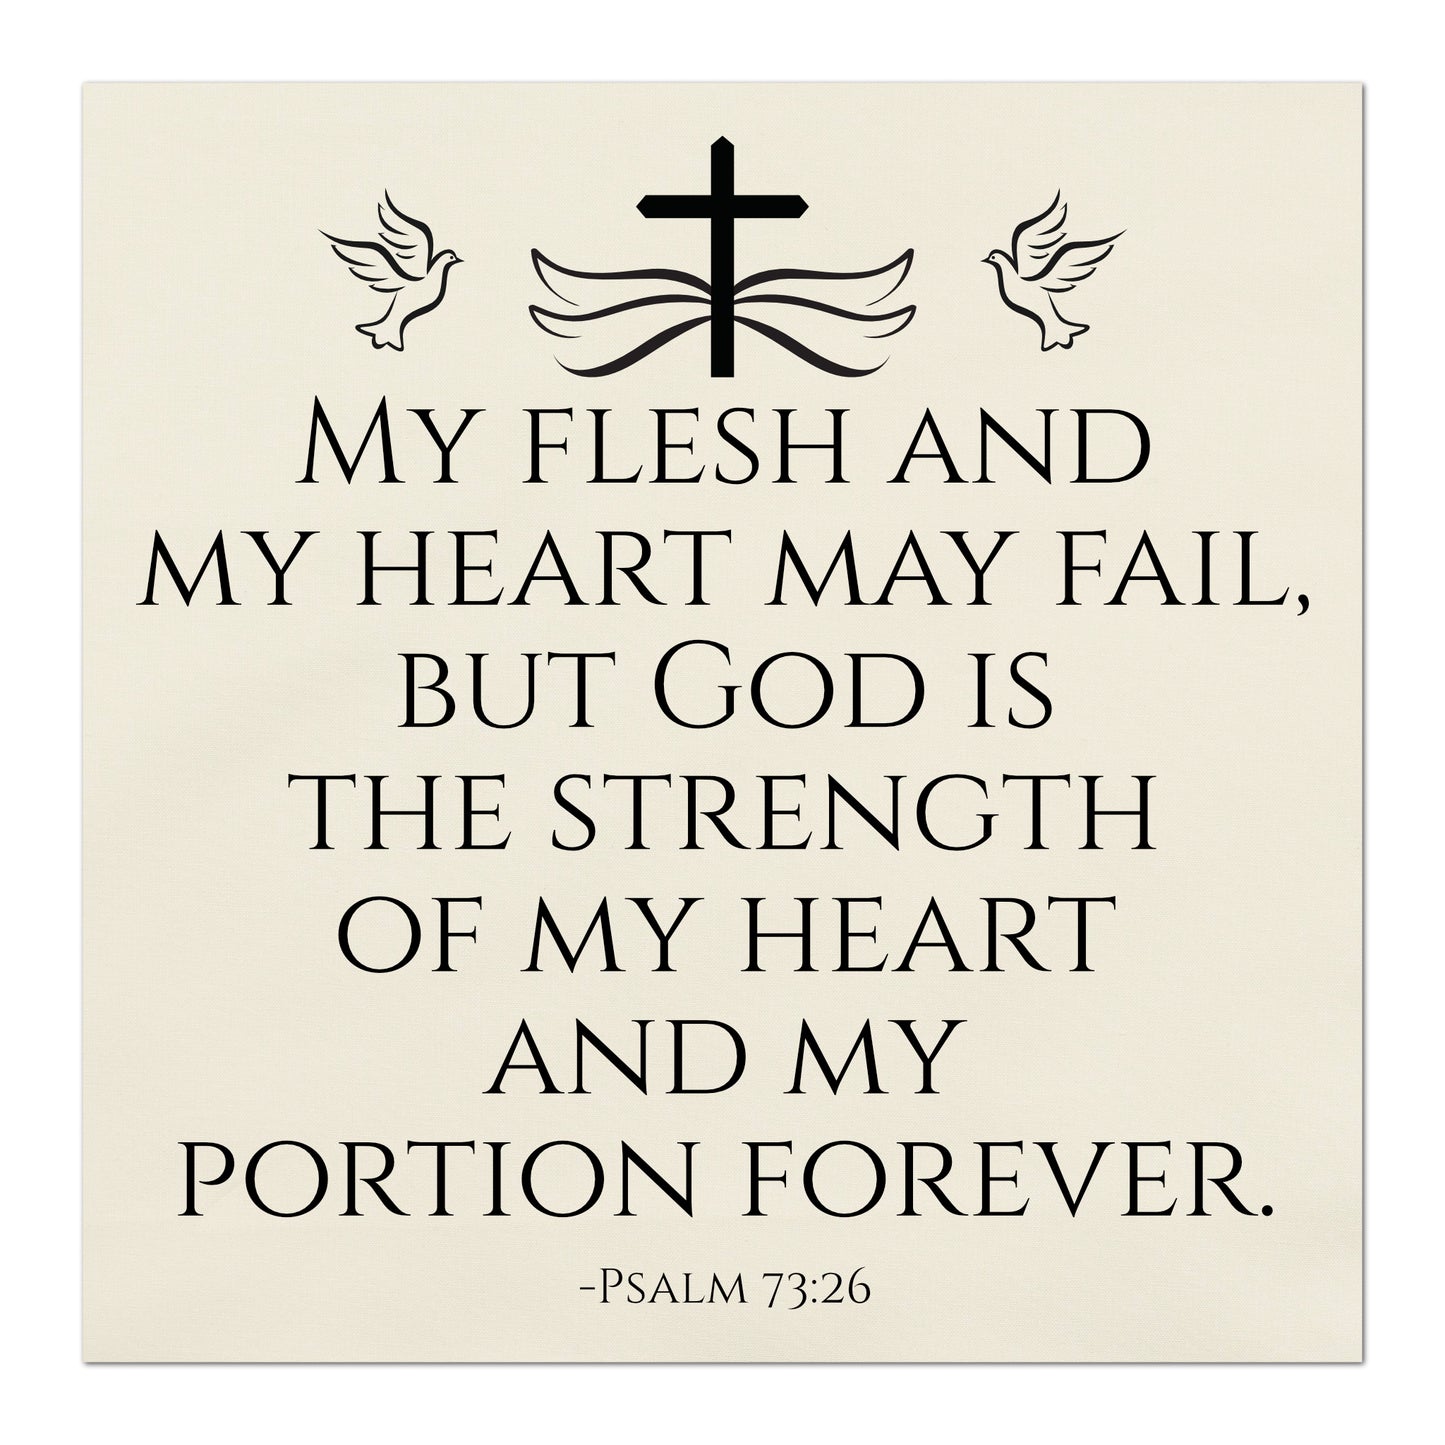 My flesh and my heart may fail, but God is the strength of my heart and my portion forever - Psalm 73:26 - Fabric Panel Print, Quilt Block